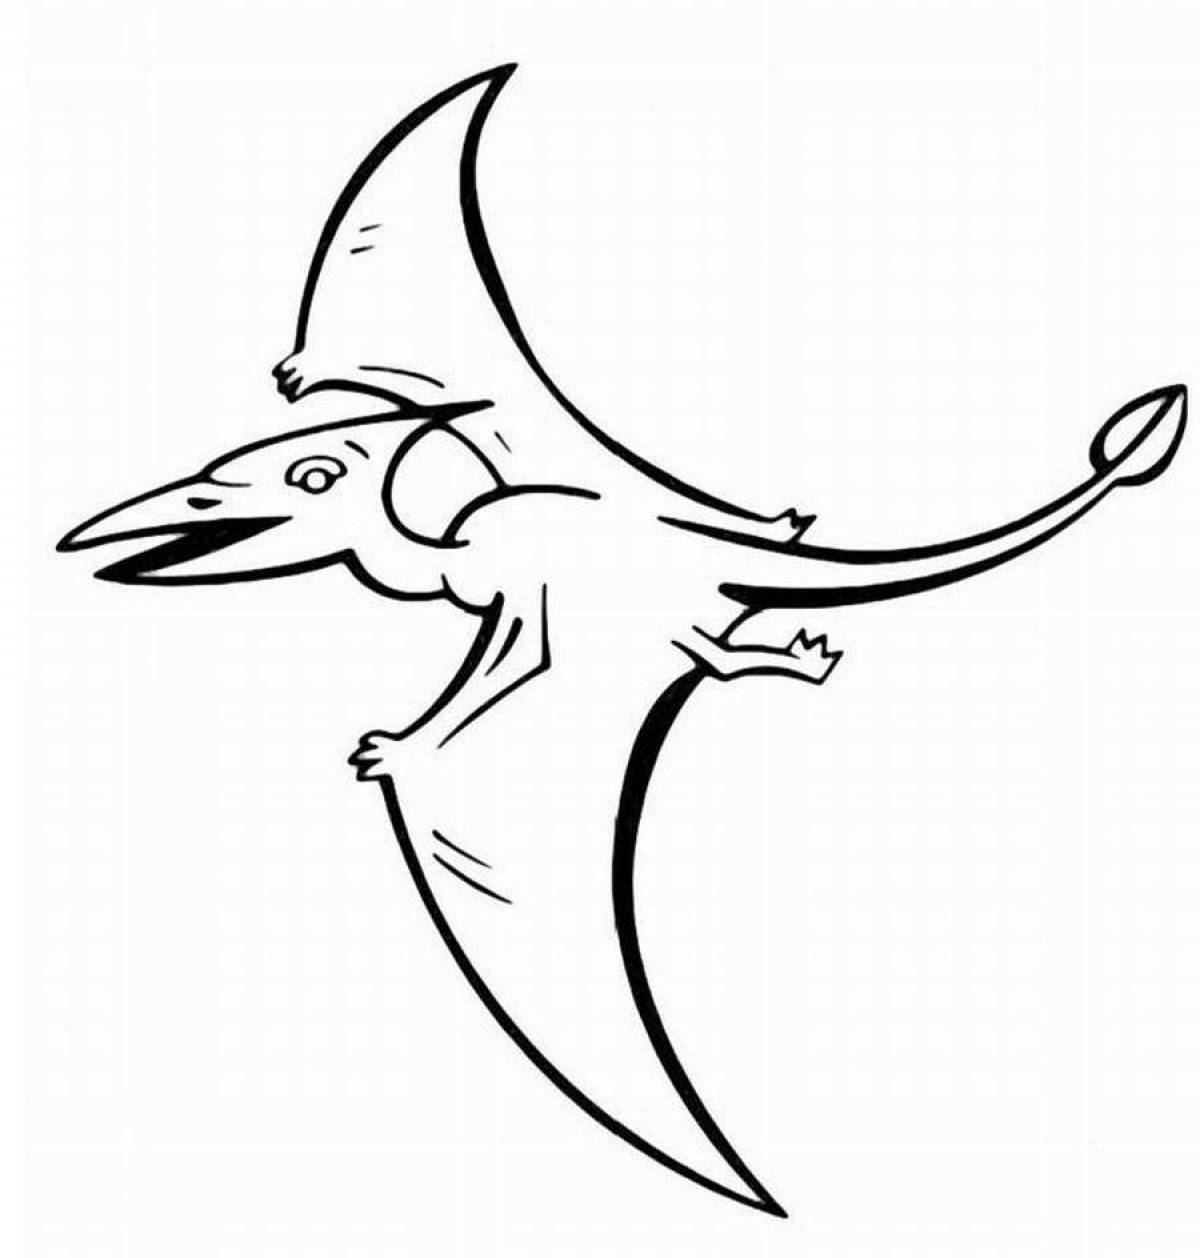 Exquisite pterodactyl coloring book